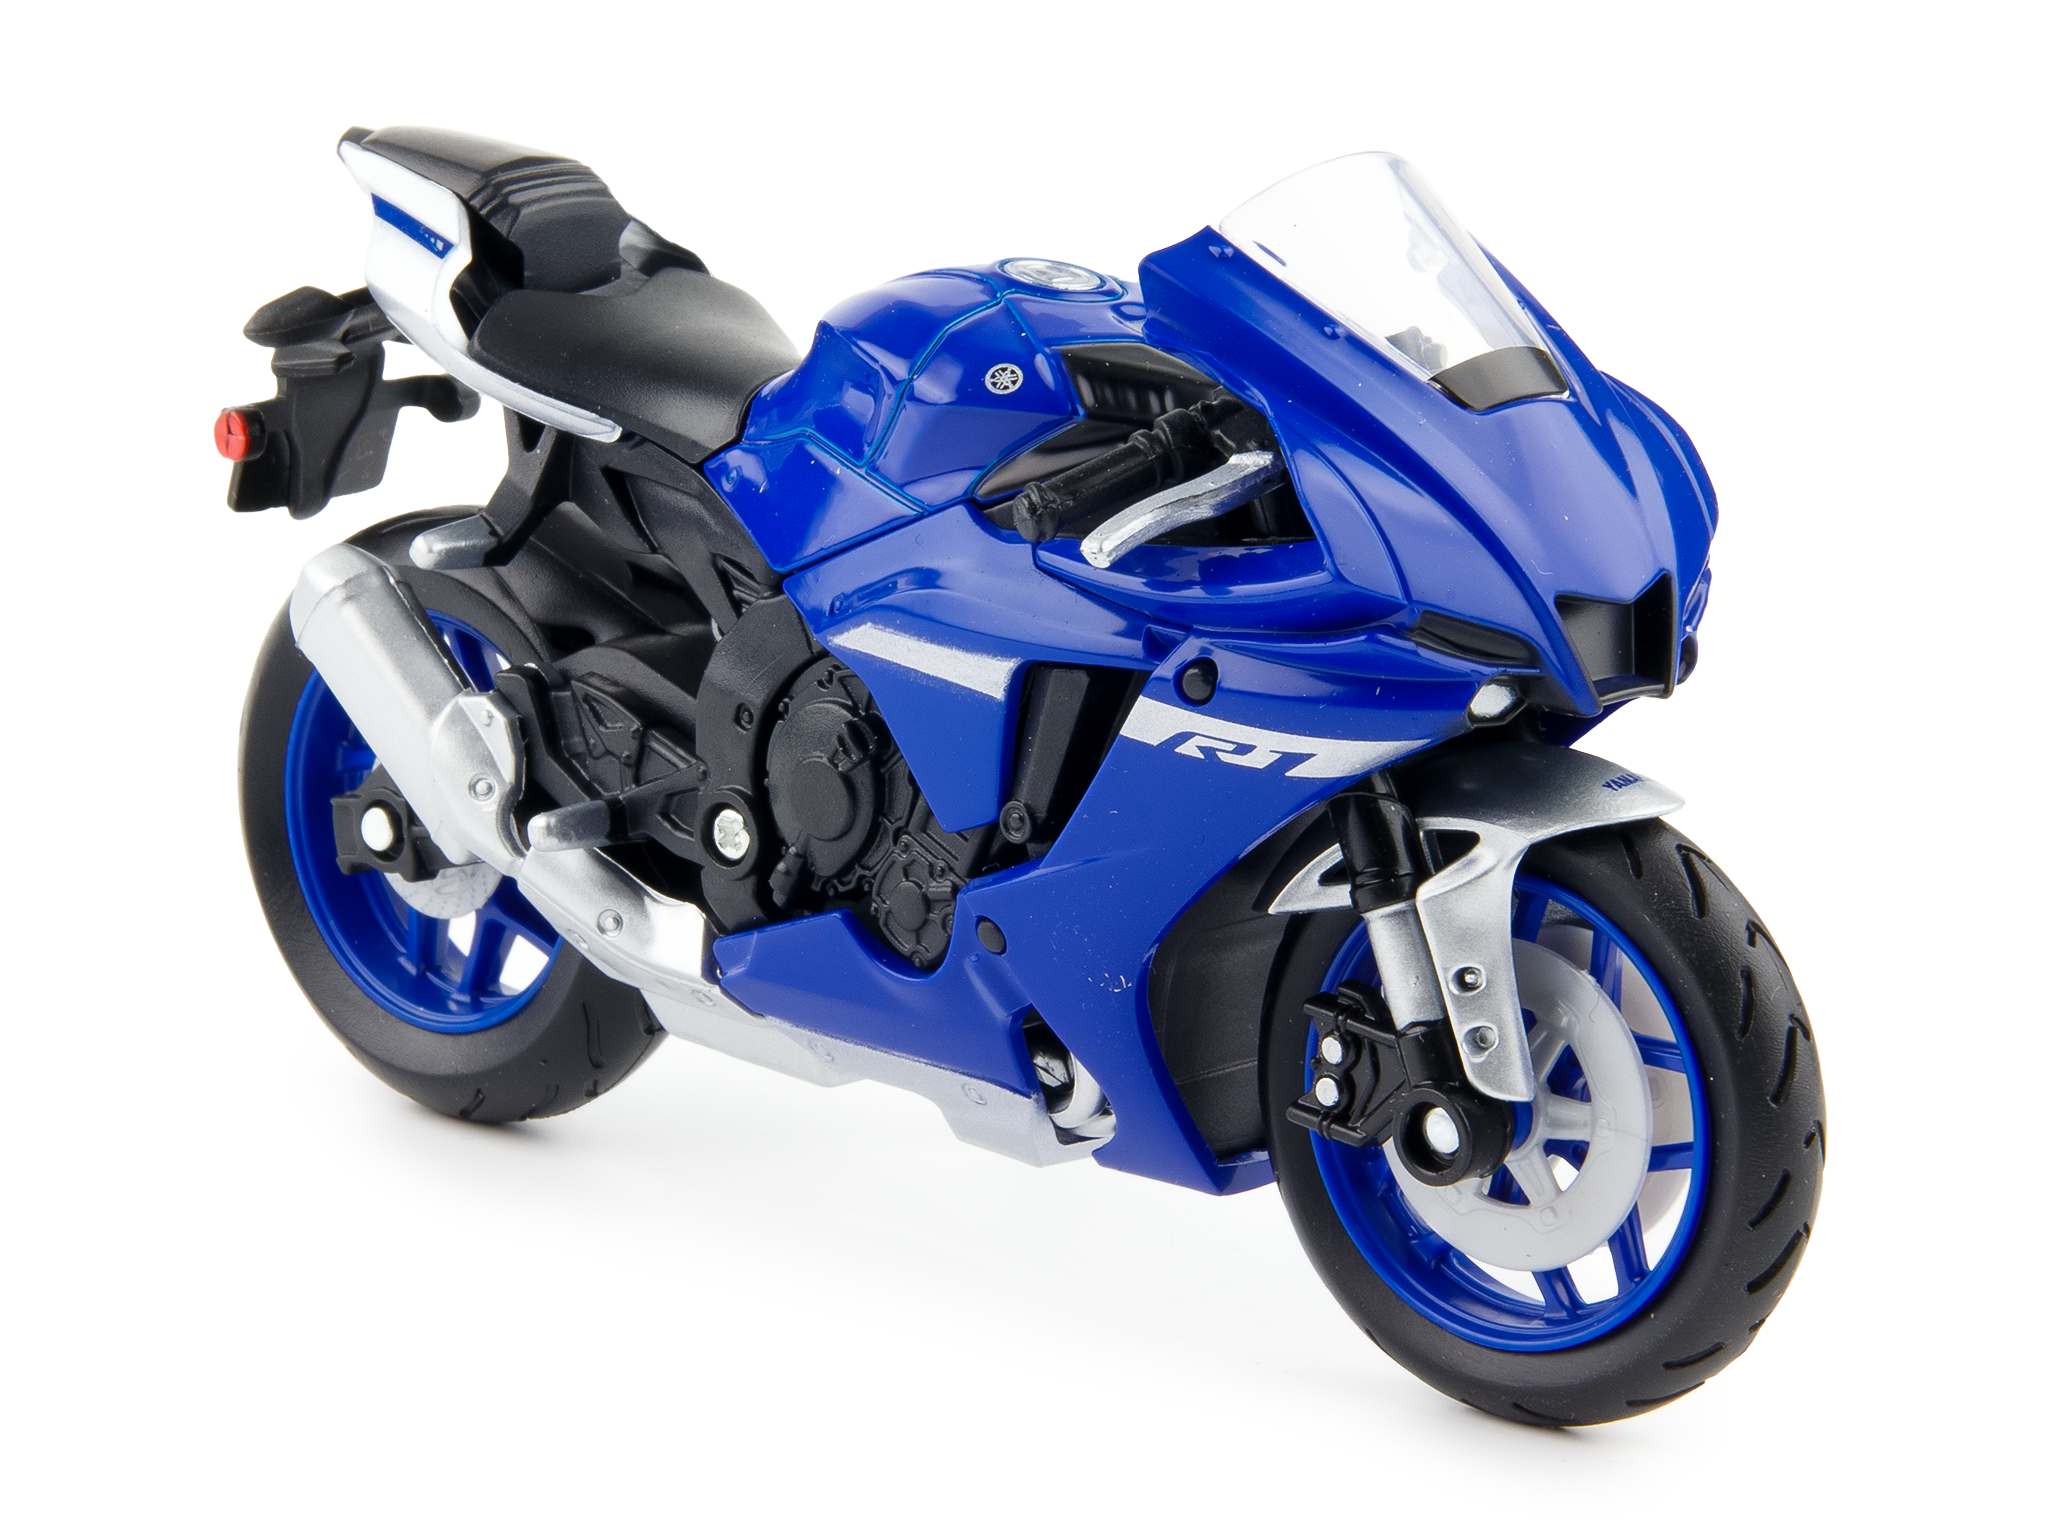 Yamaha YZF-R1 2021 blue - 1:18 Scale Diecast Model Motorcycle